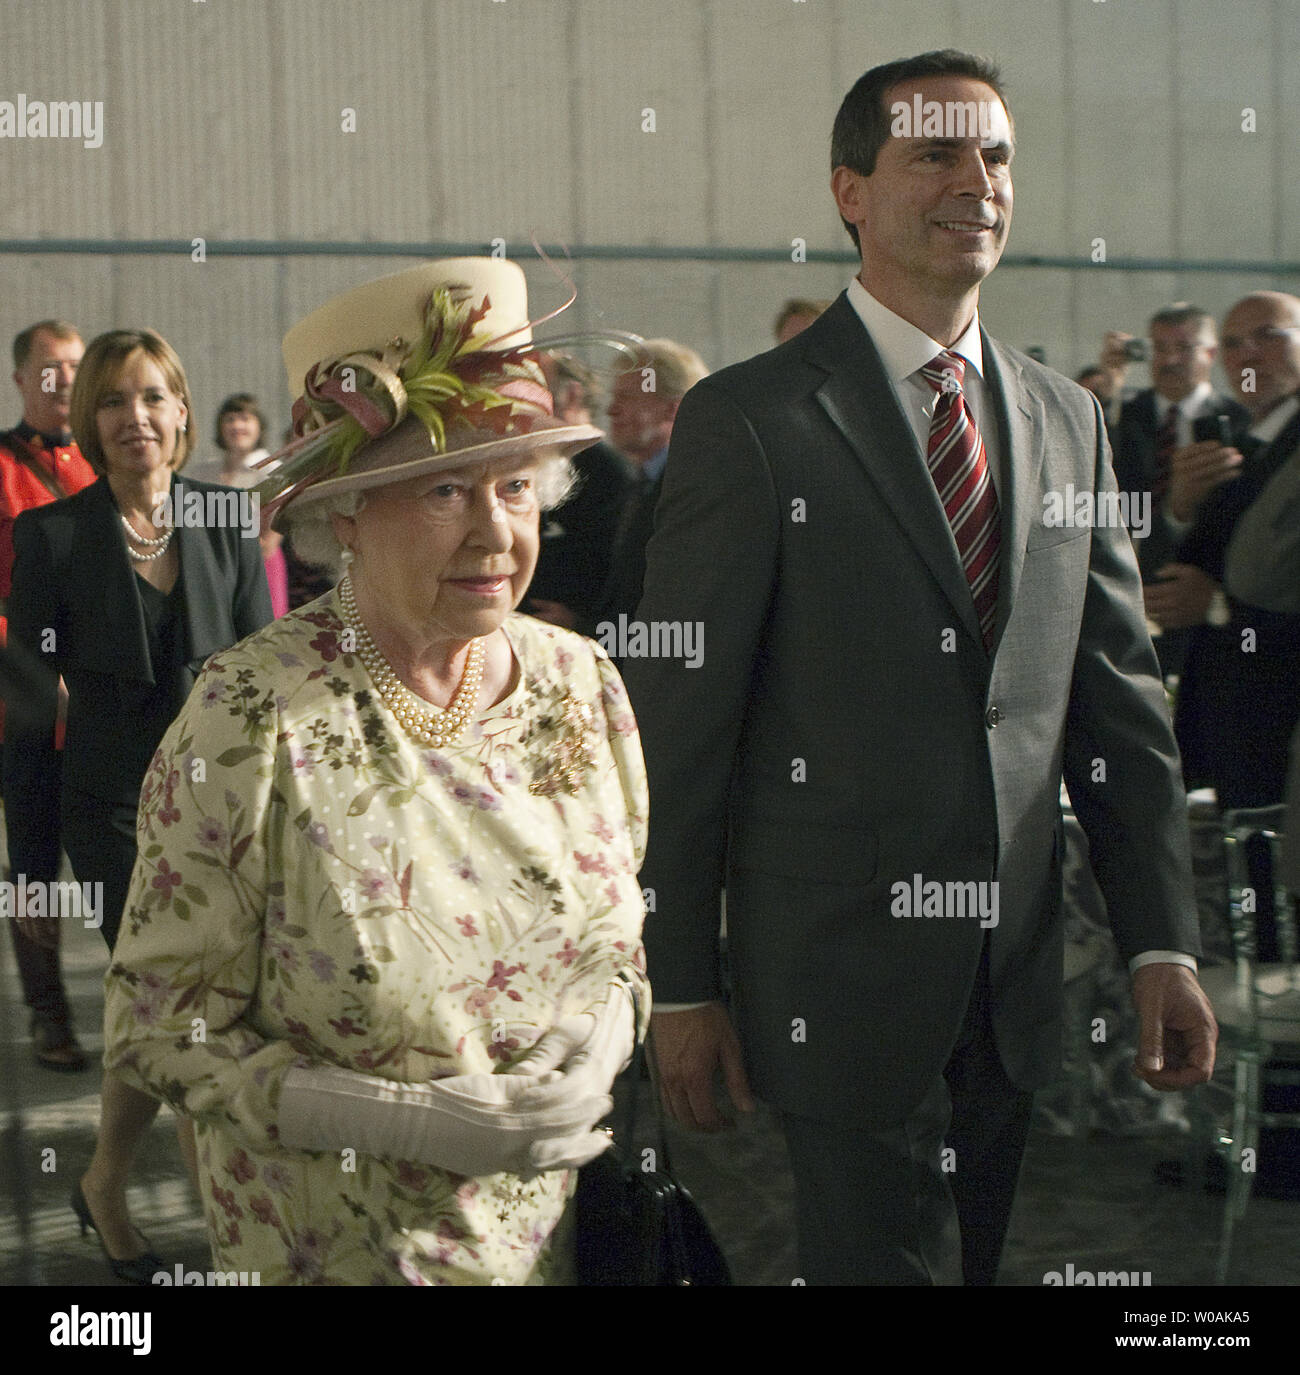 Ontario Premier Dalton McGuinty escorts Great Britain's Queen Elizabeth as she and Prince Philip arrive for the luncheon during their tour of Pinewood Toronto Studios in Toronto, Ontario, July 5, 2010. The Queen and Prince Philip are on day eight of their nine day Royal Tour of Canada.  UPI/Heinz Ruckemann Stock Photo